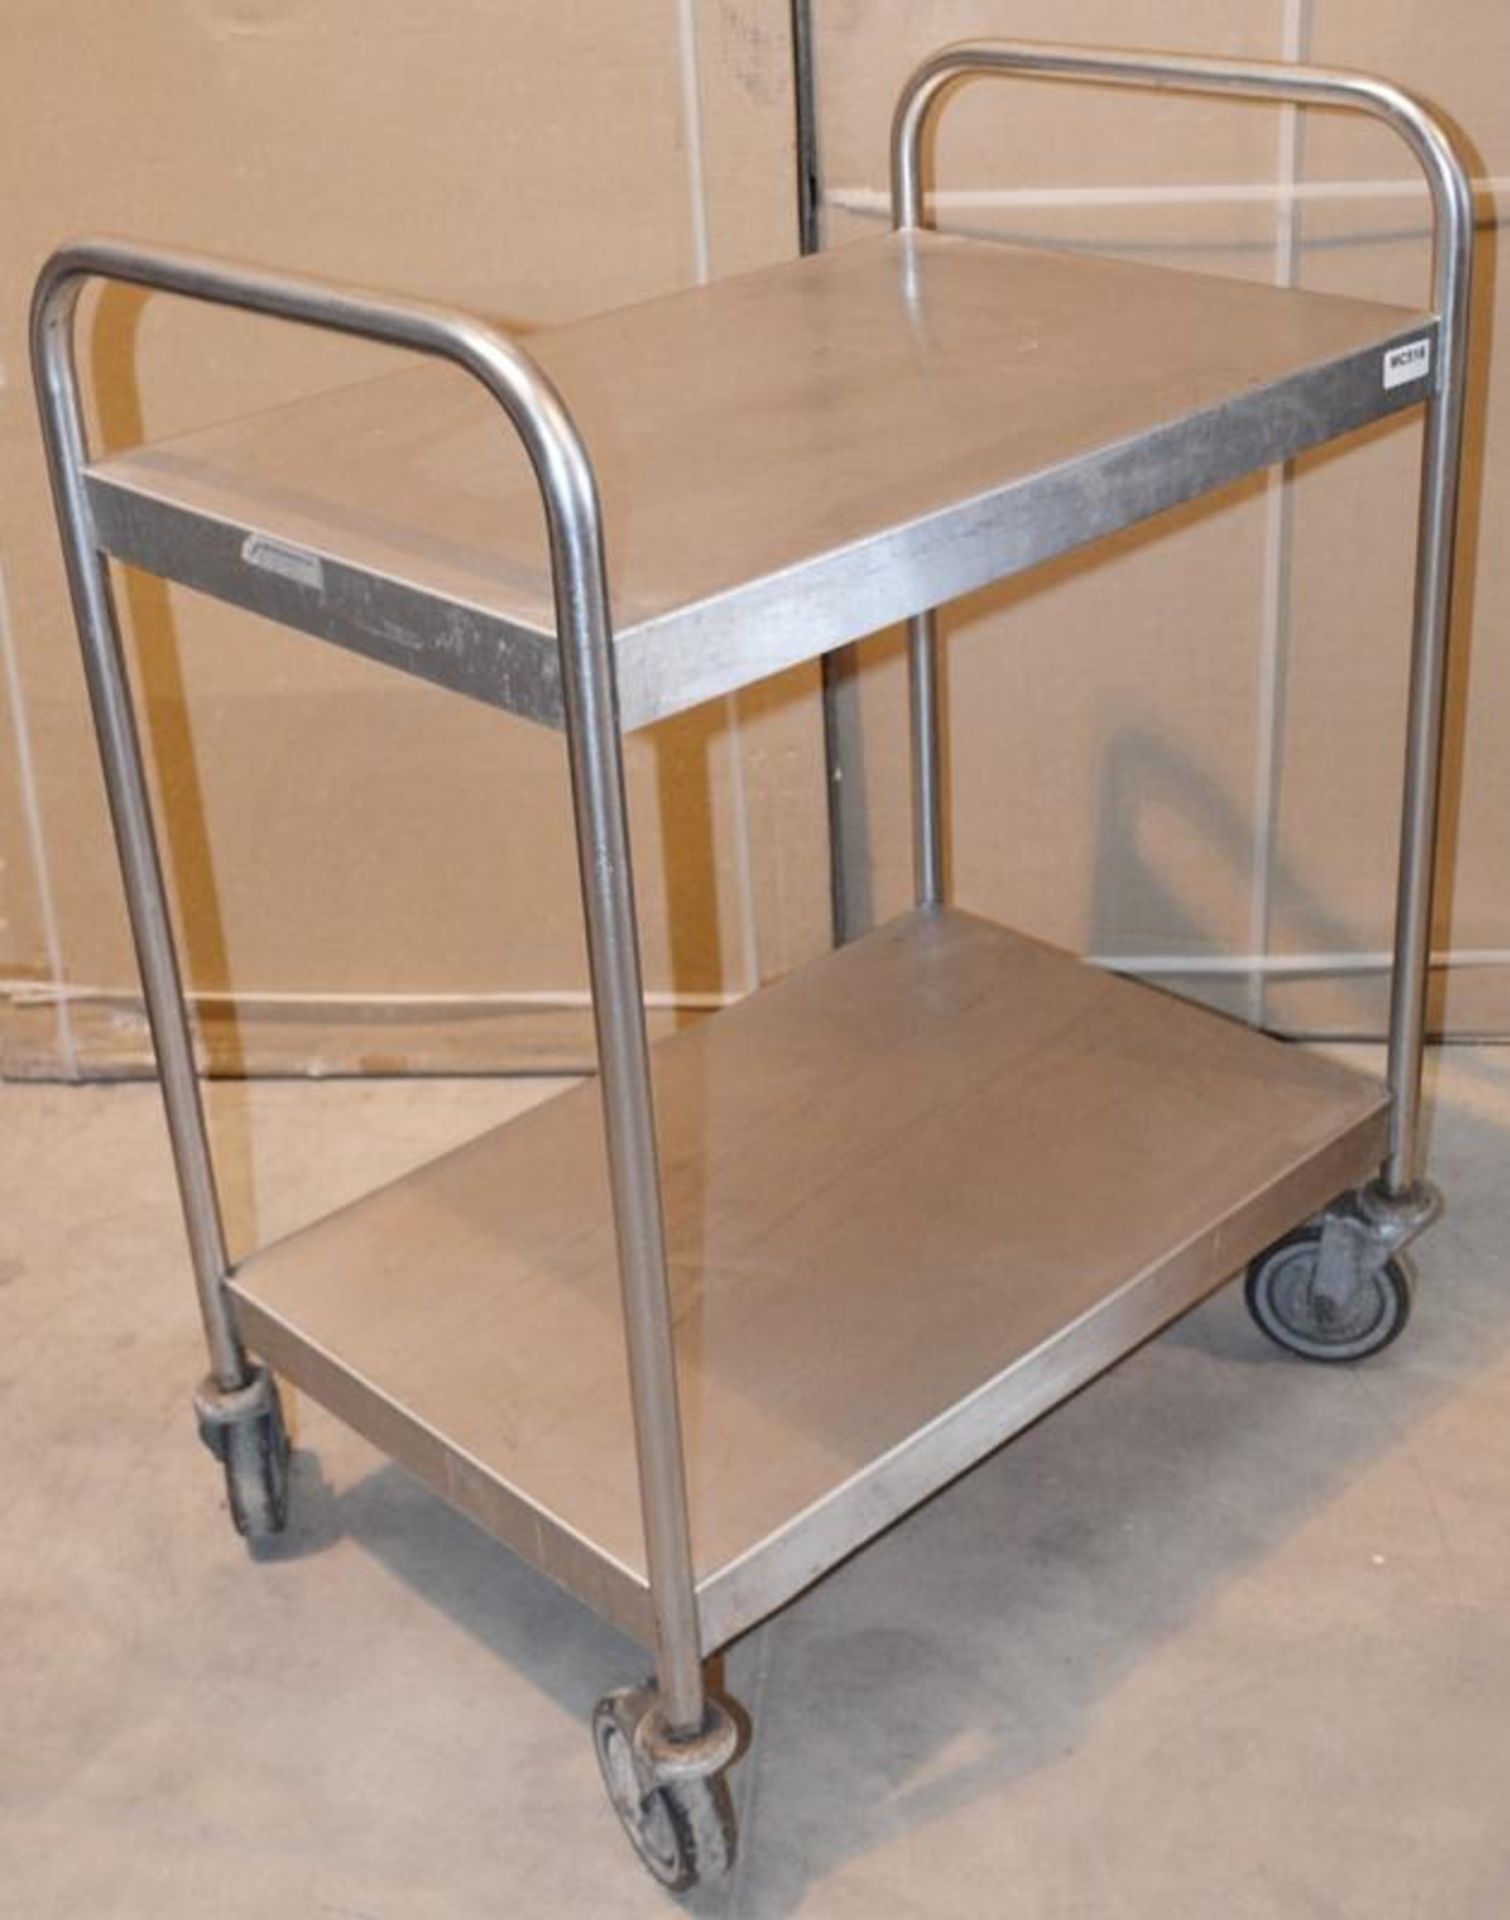 1 x Stainless Steel Commercial Kitchen 2-Teir Trolley On Castors - Dimensions: W74 x D48 x H95cm - V - Image 2 of 4